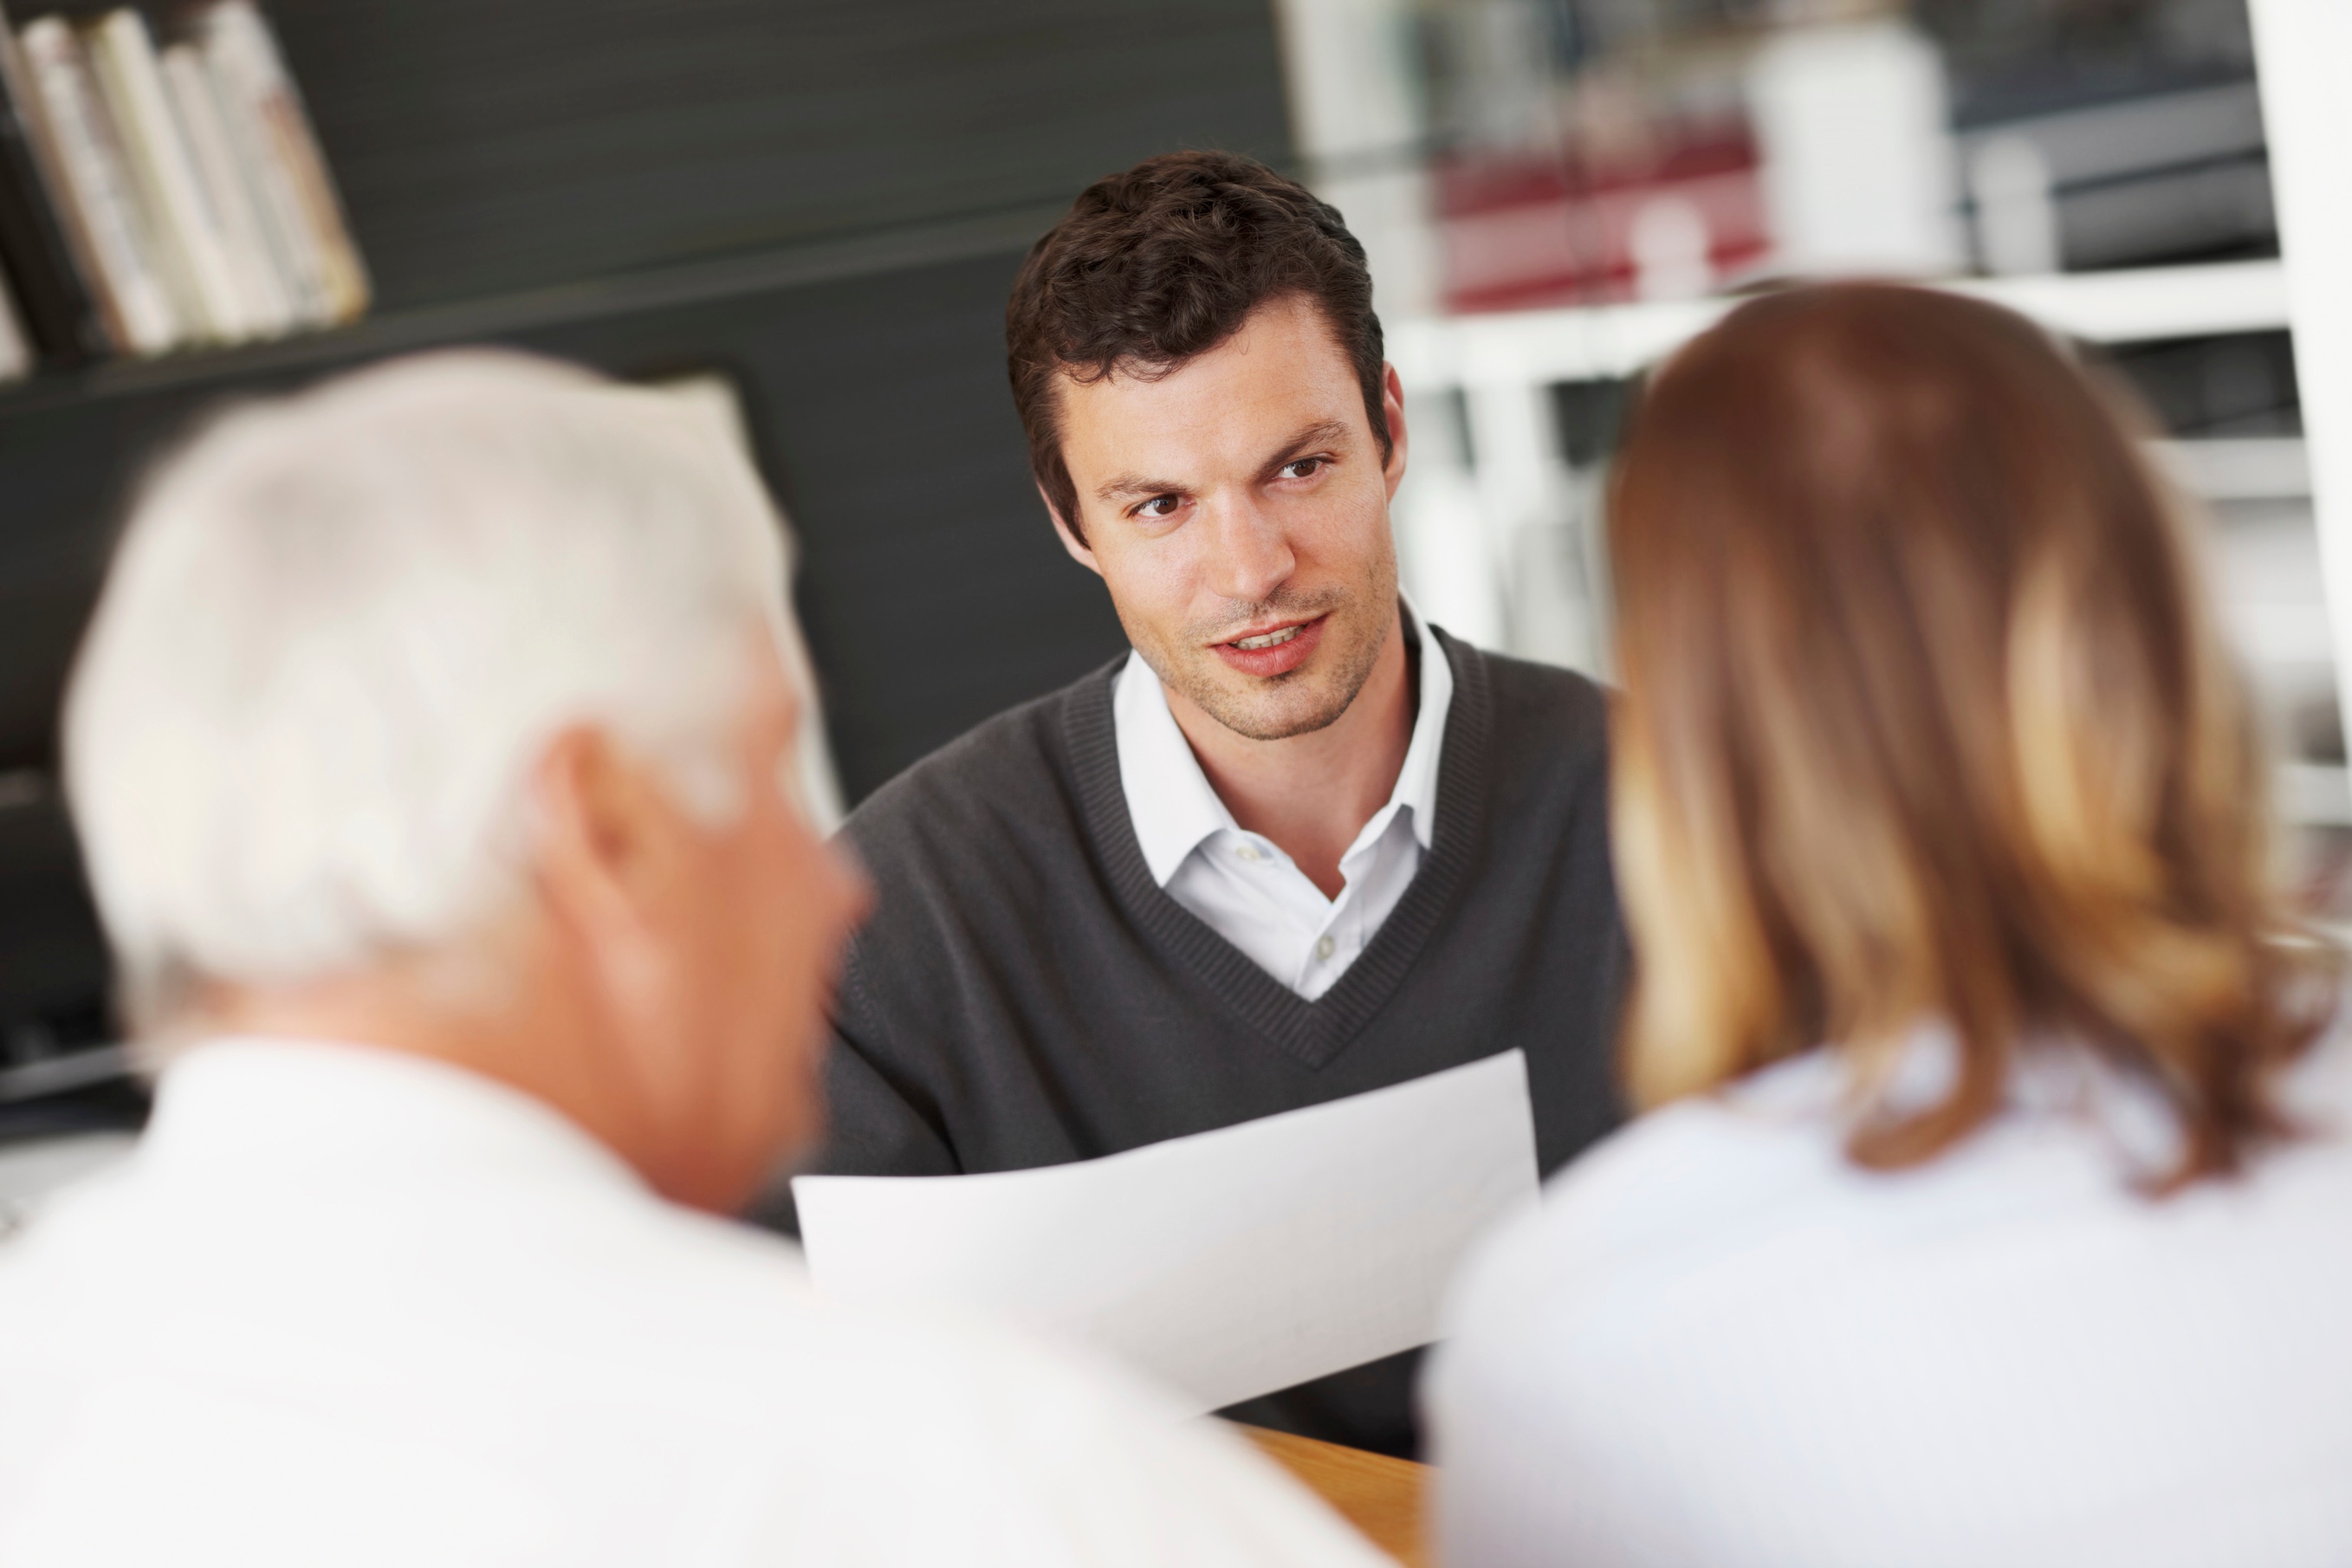 Financial advisor having a conversation with clients